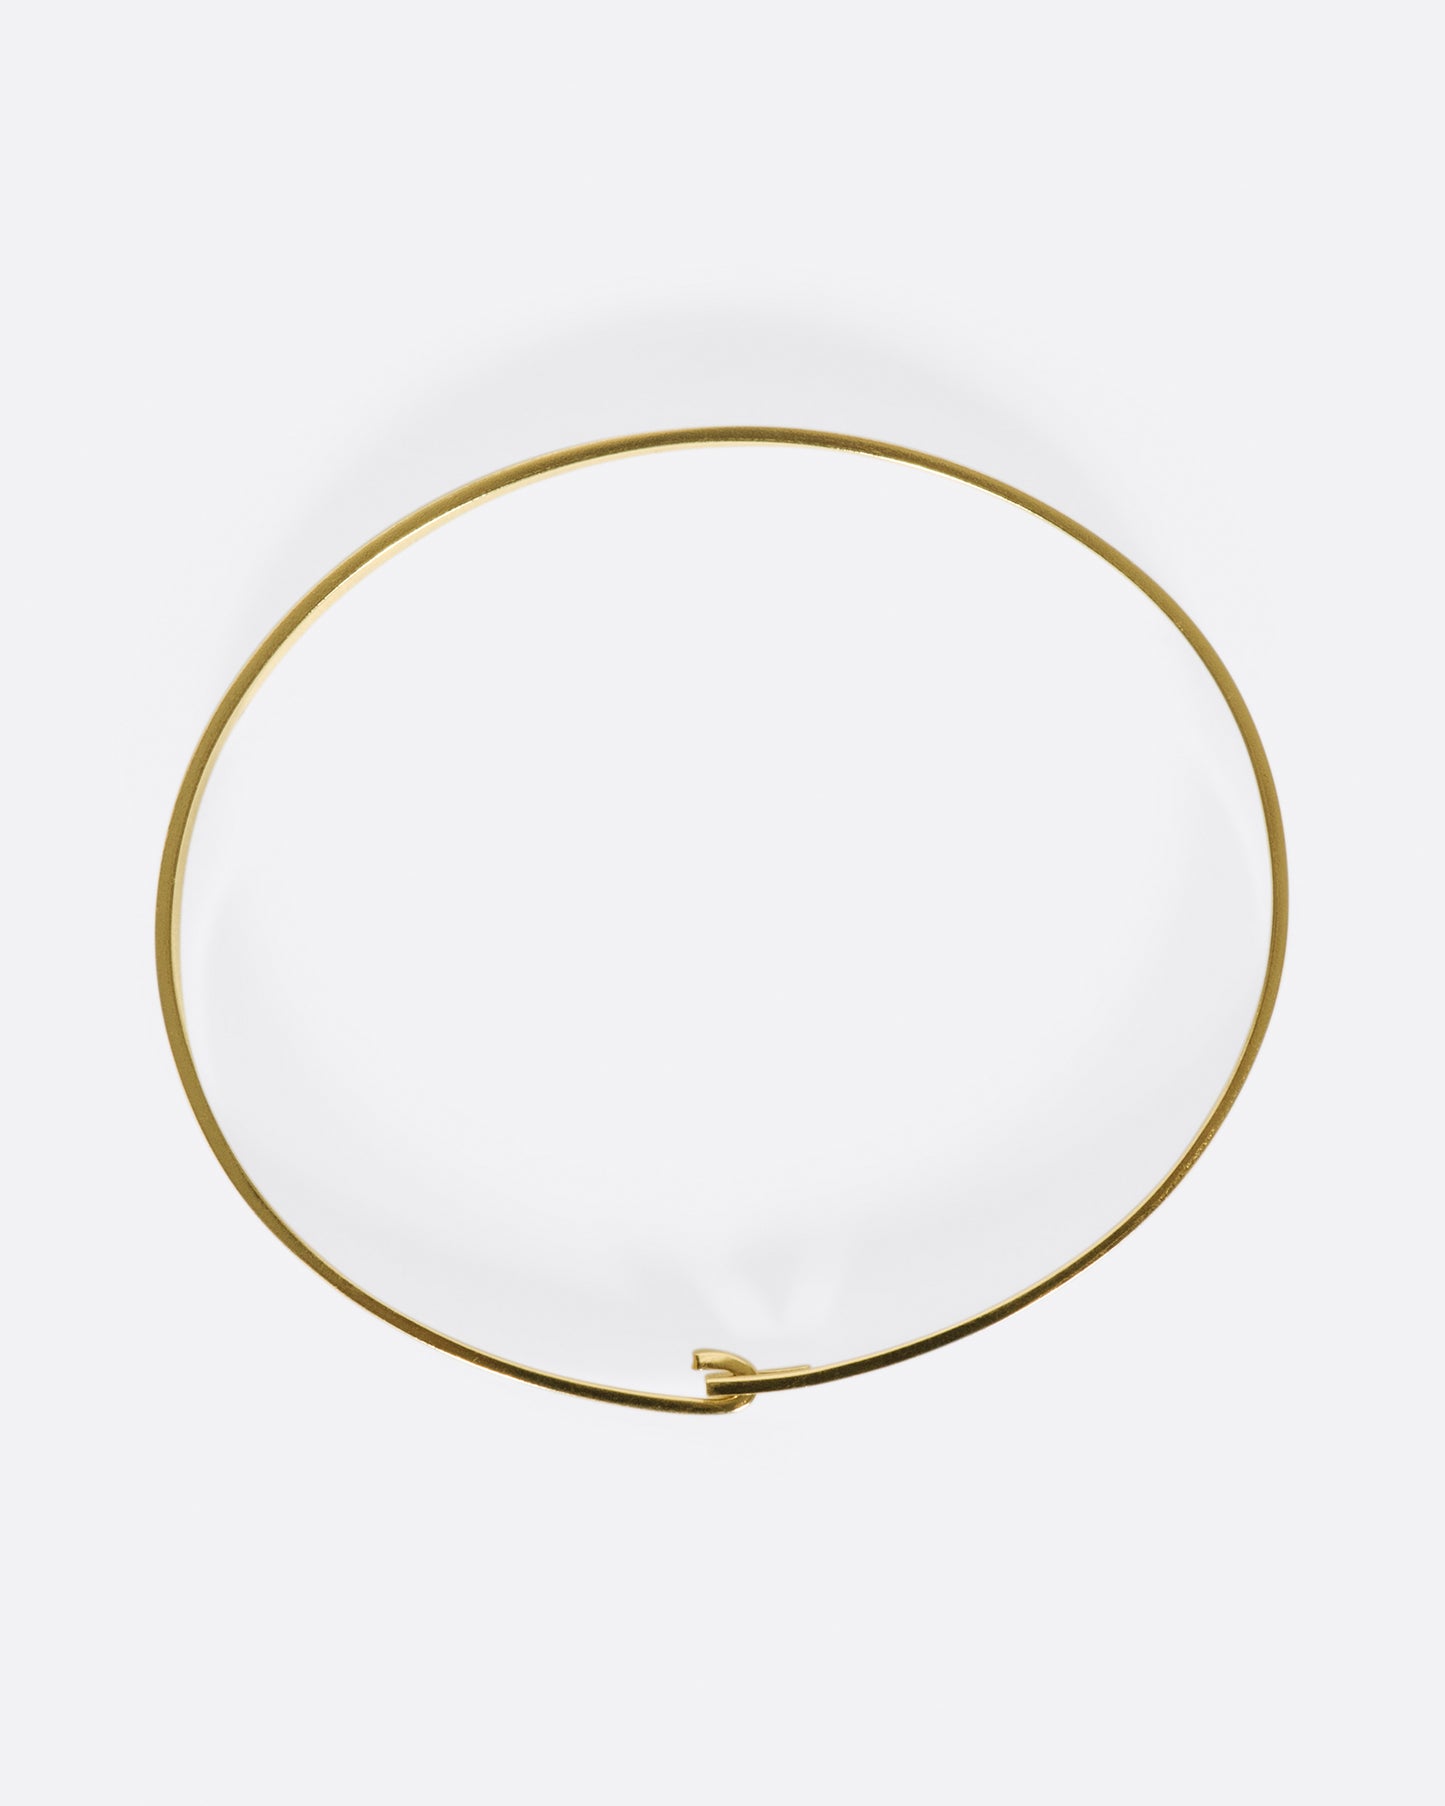 A simple and sturdy gold bracelet, perfect on its own or layered with your other favorite pieces.